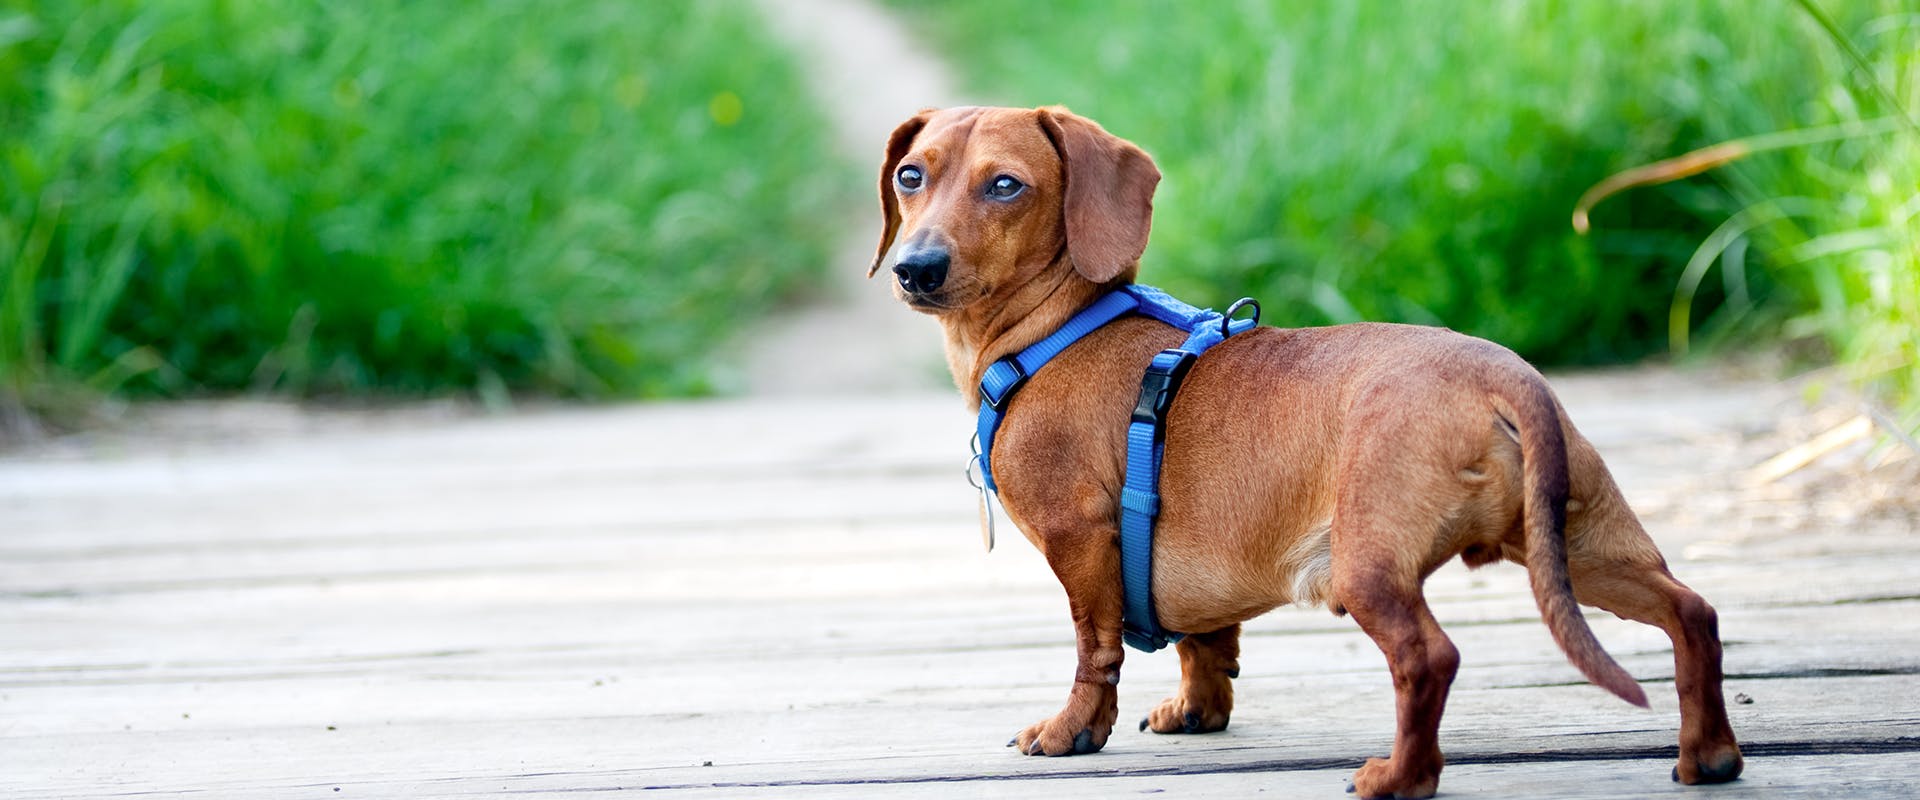 A dachshund walking outdoors down a wooden path, wearing a bright blue small dog harness